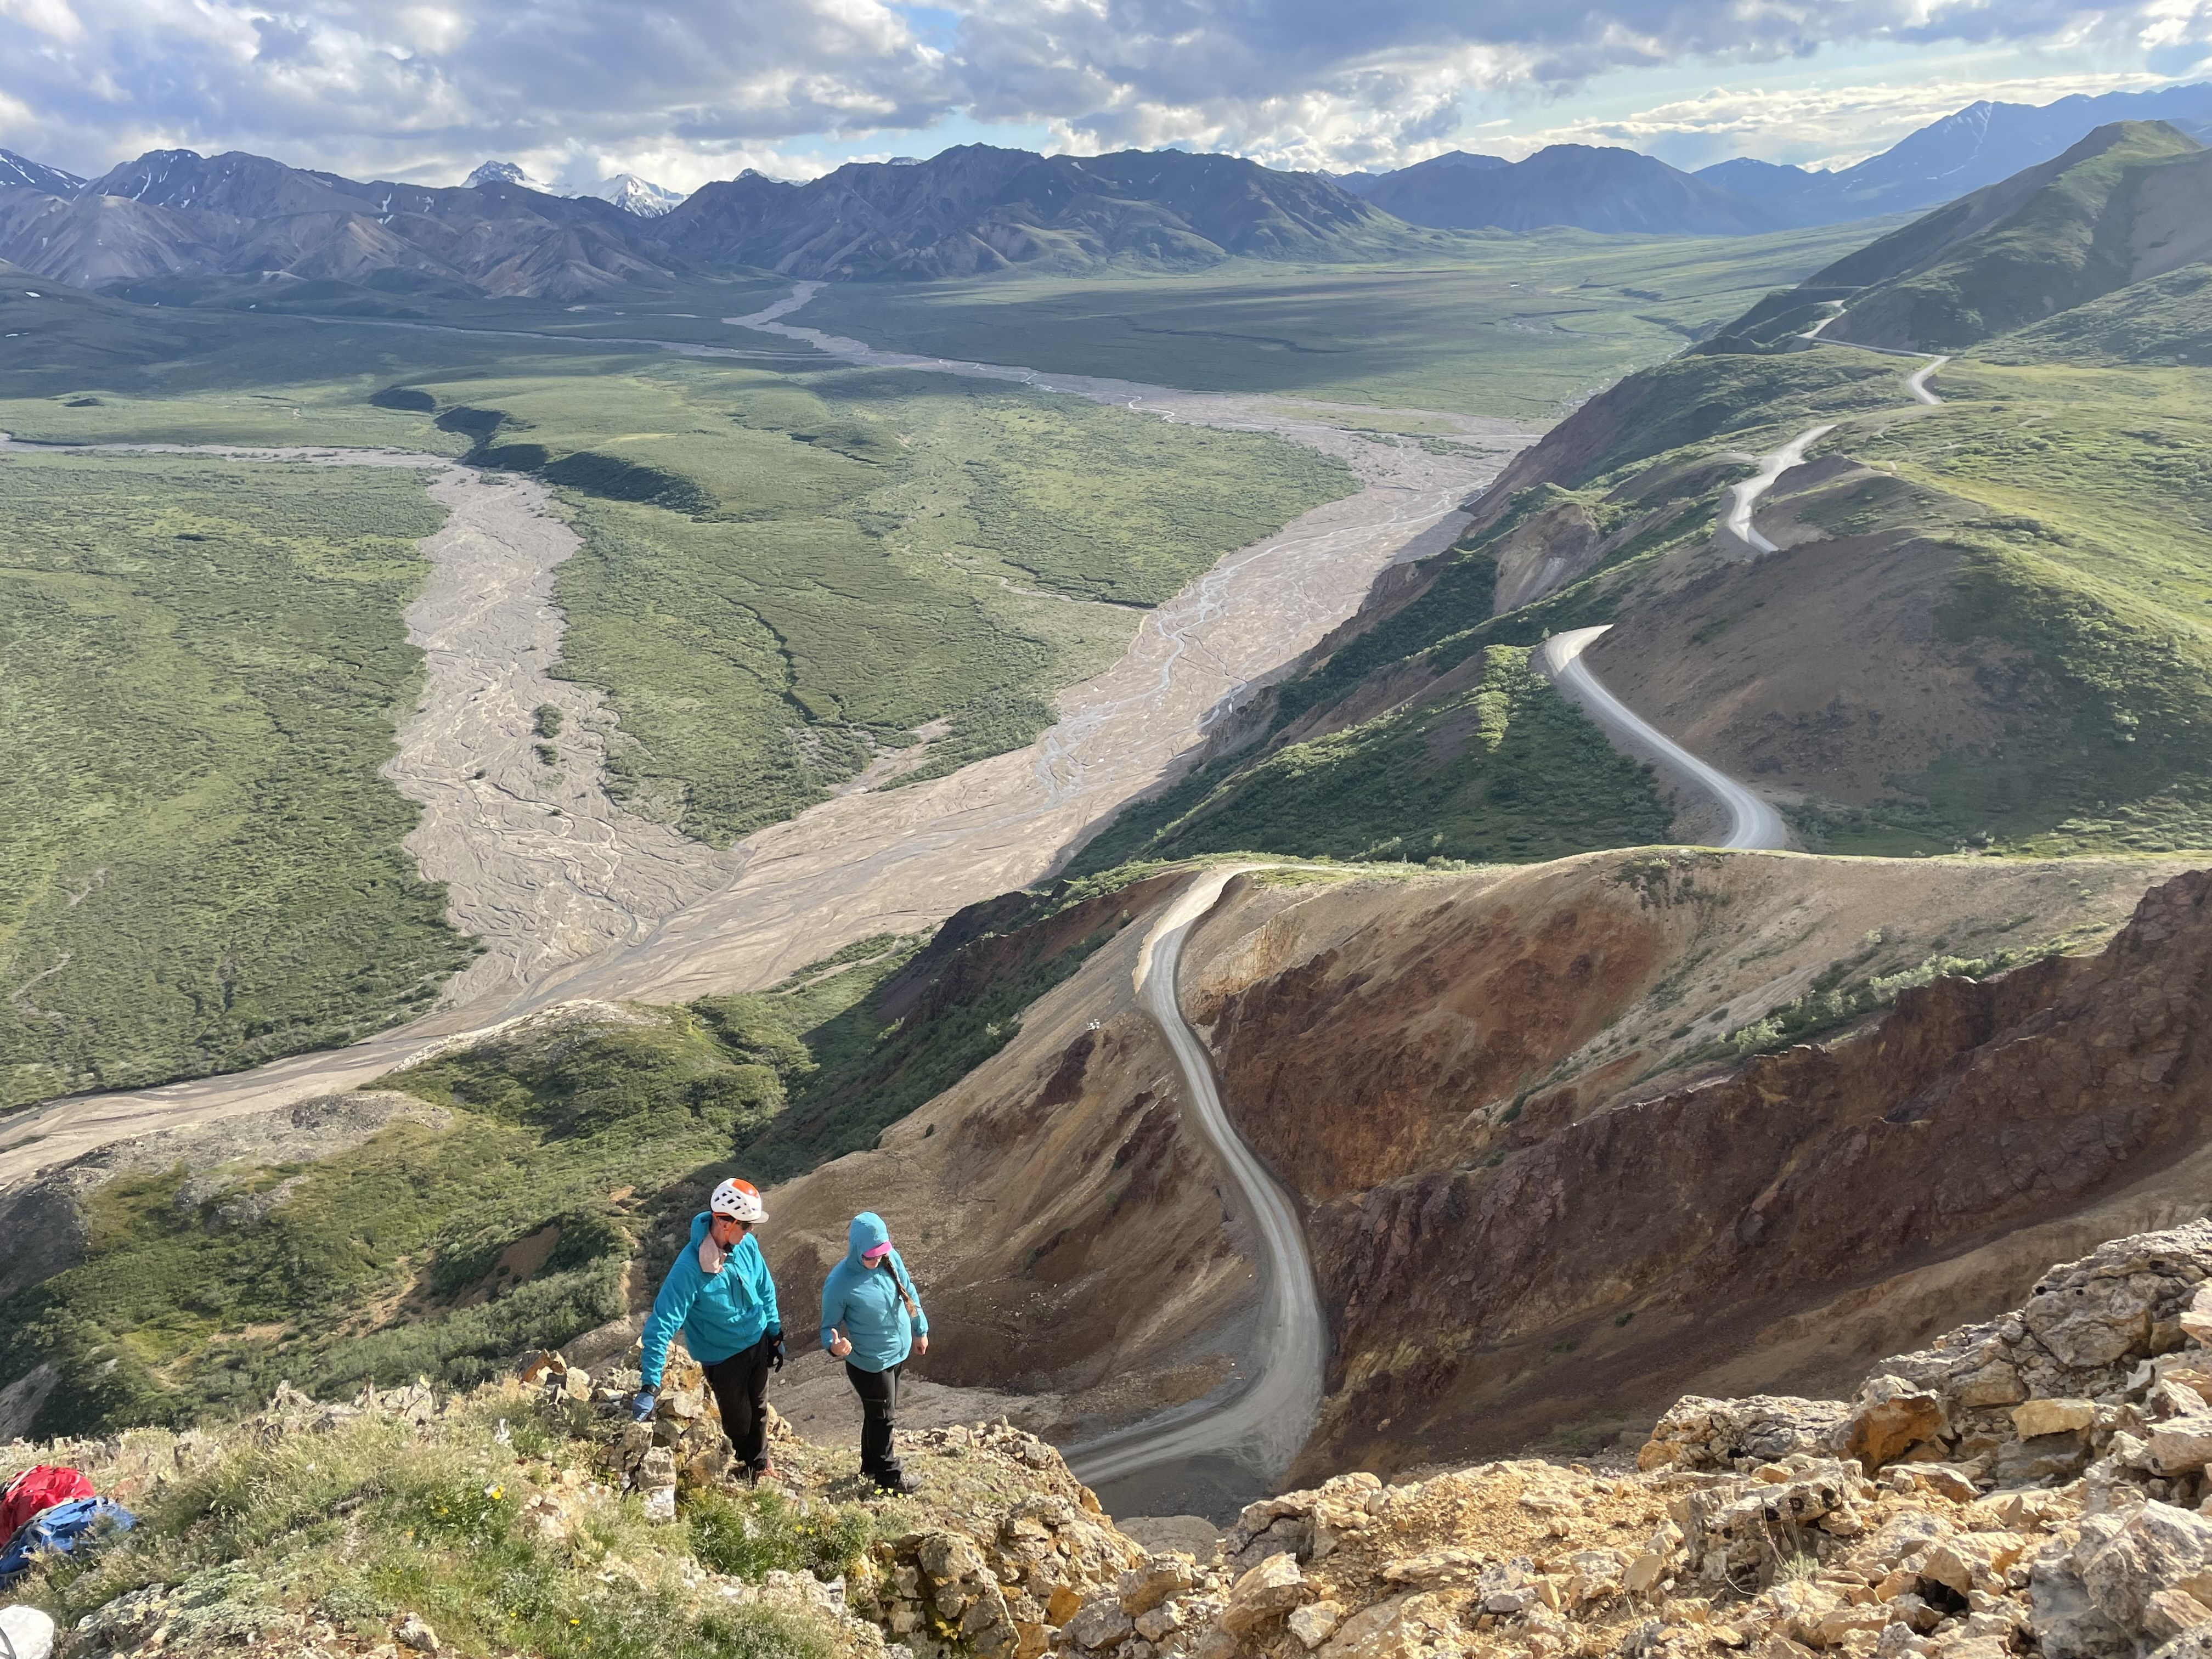 Two climbers have a conversation on a rocky ridge overlooking a vast braided river valley